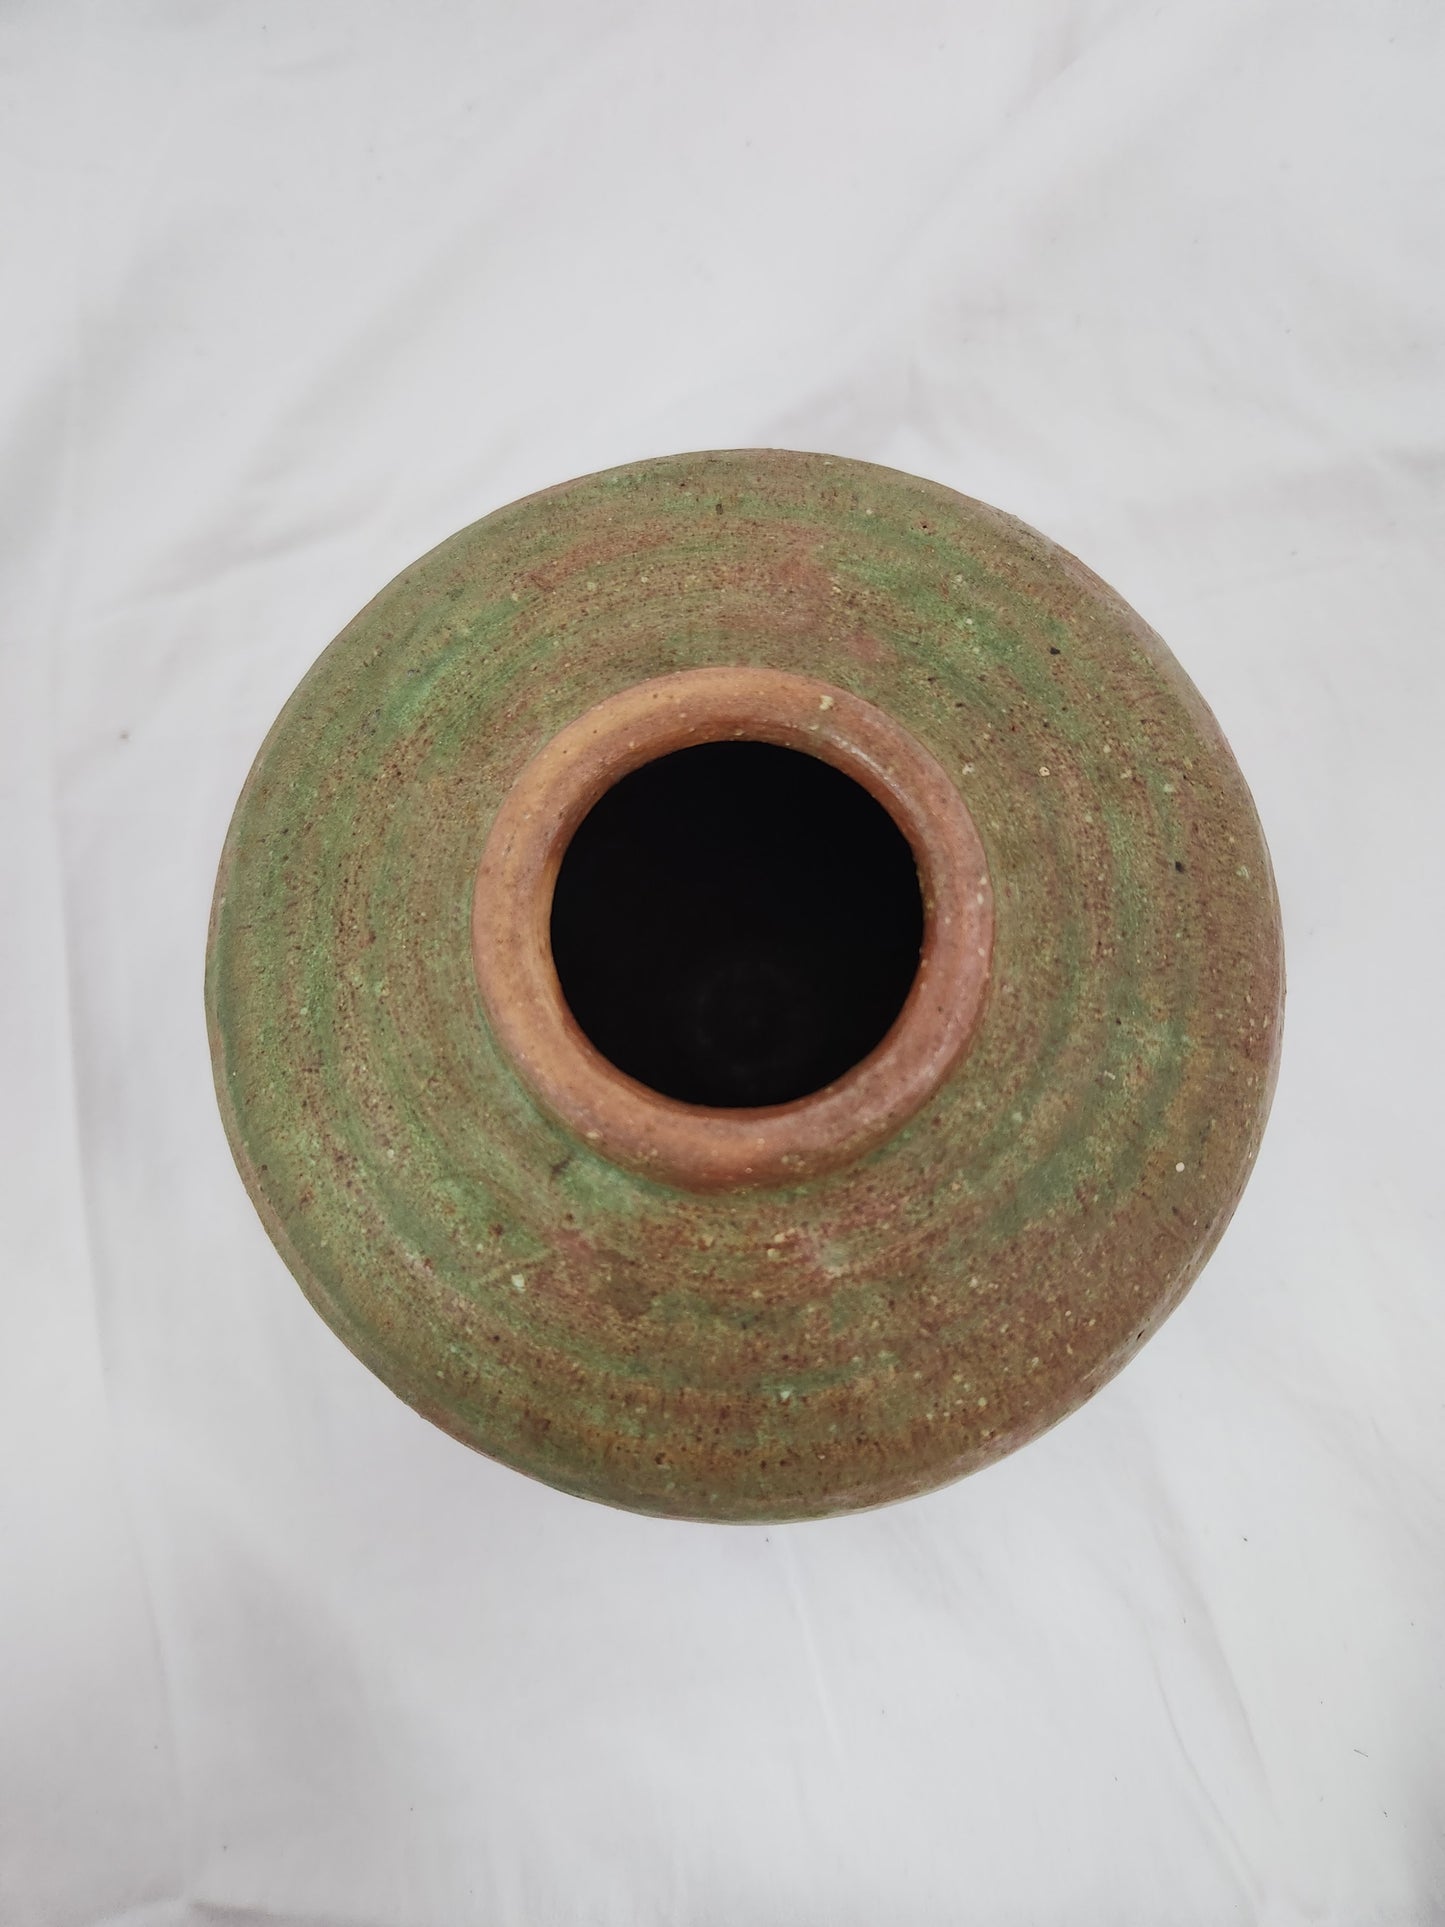 Seagrove Pottery Brown/Green Vase